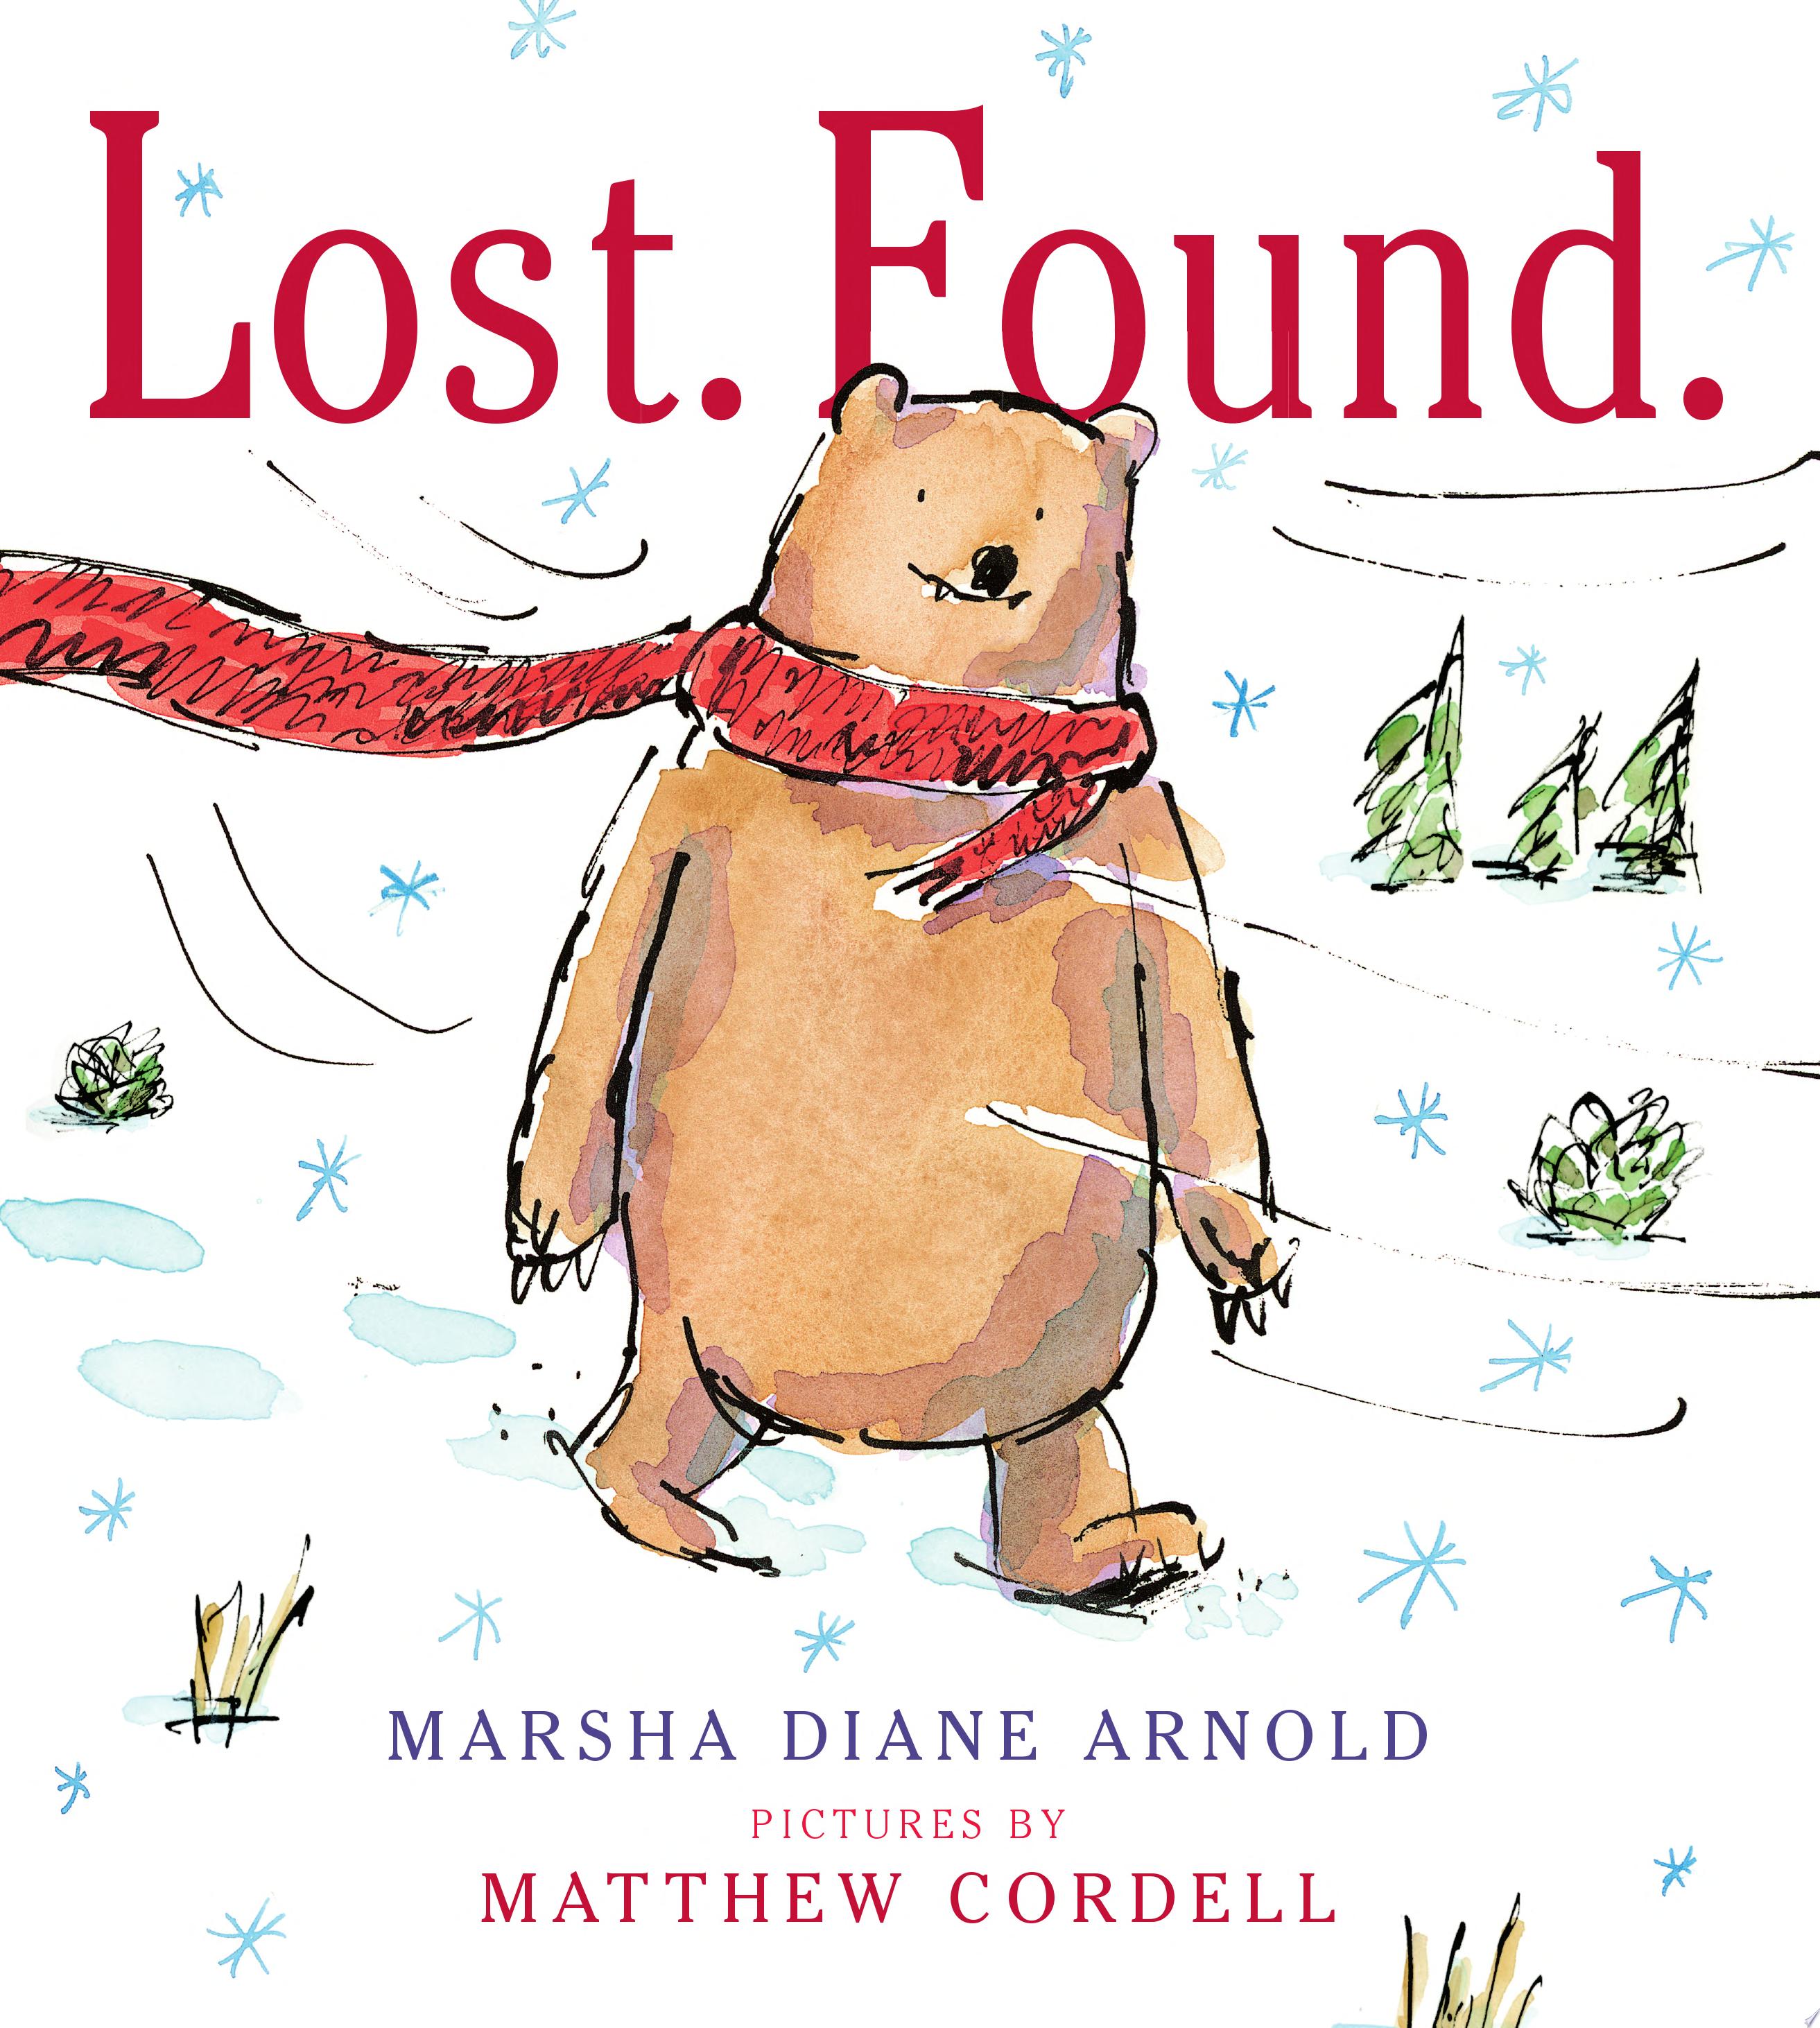 Image for "Lost. Found."